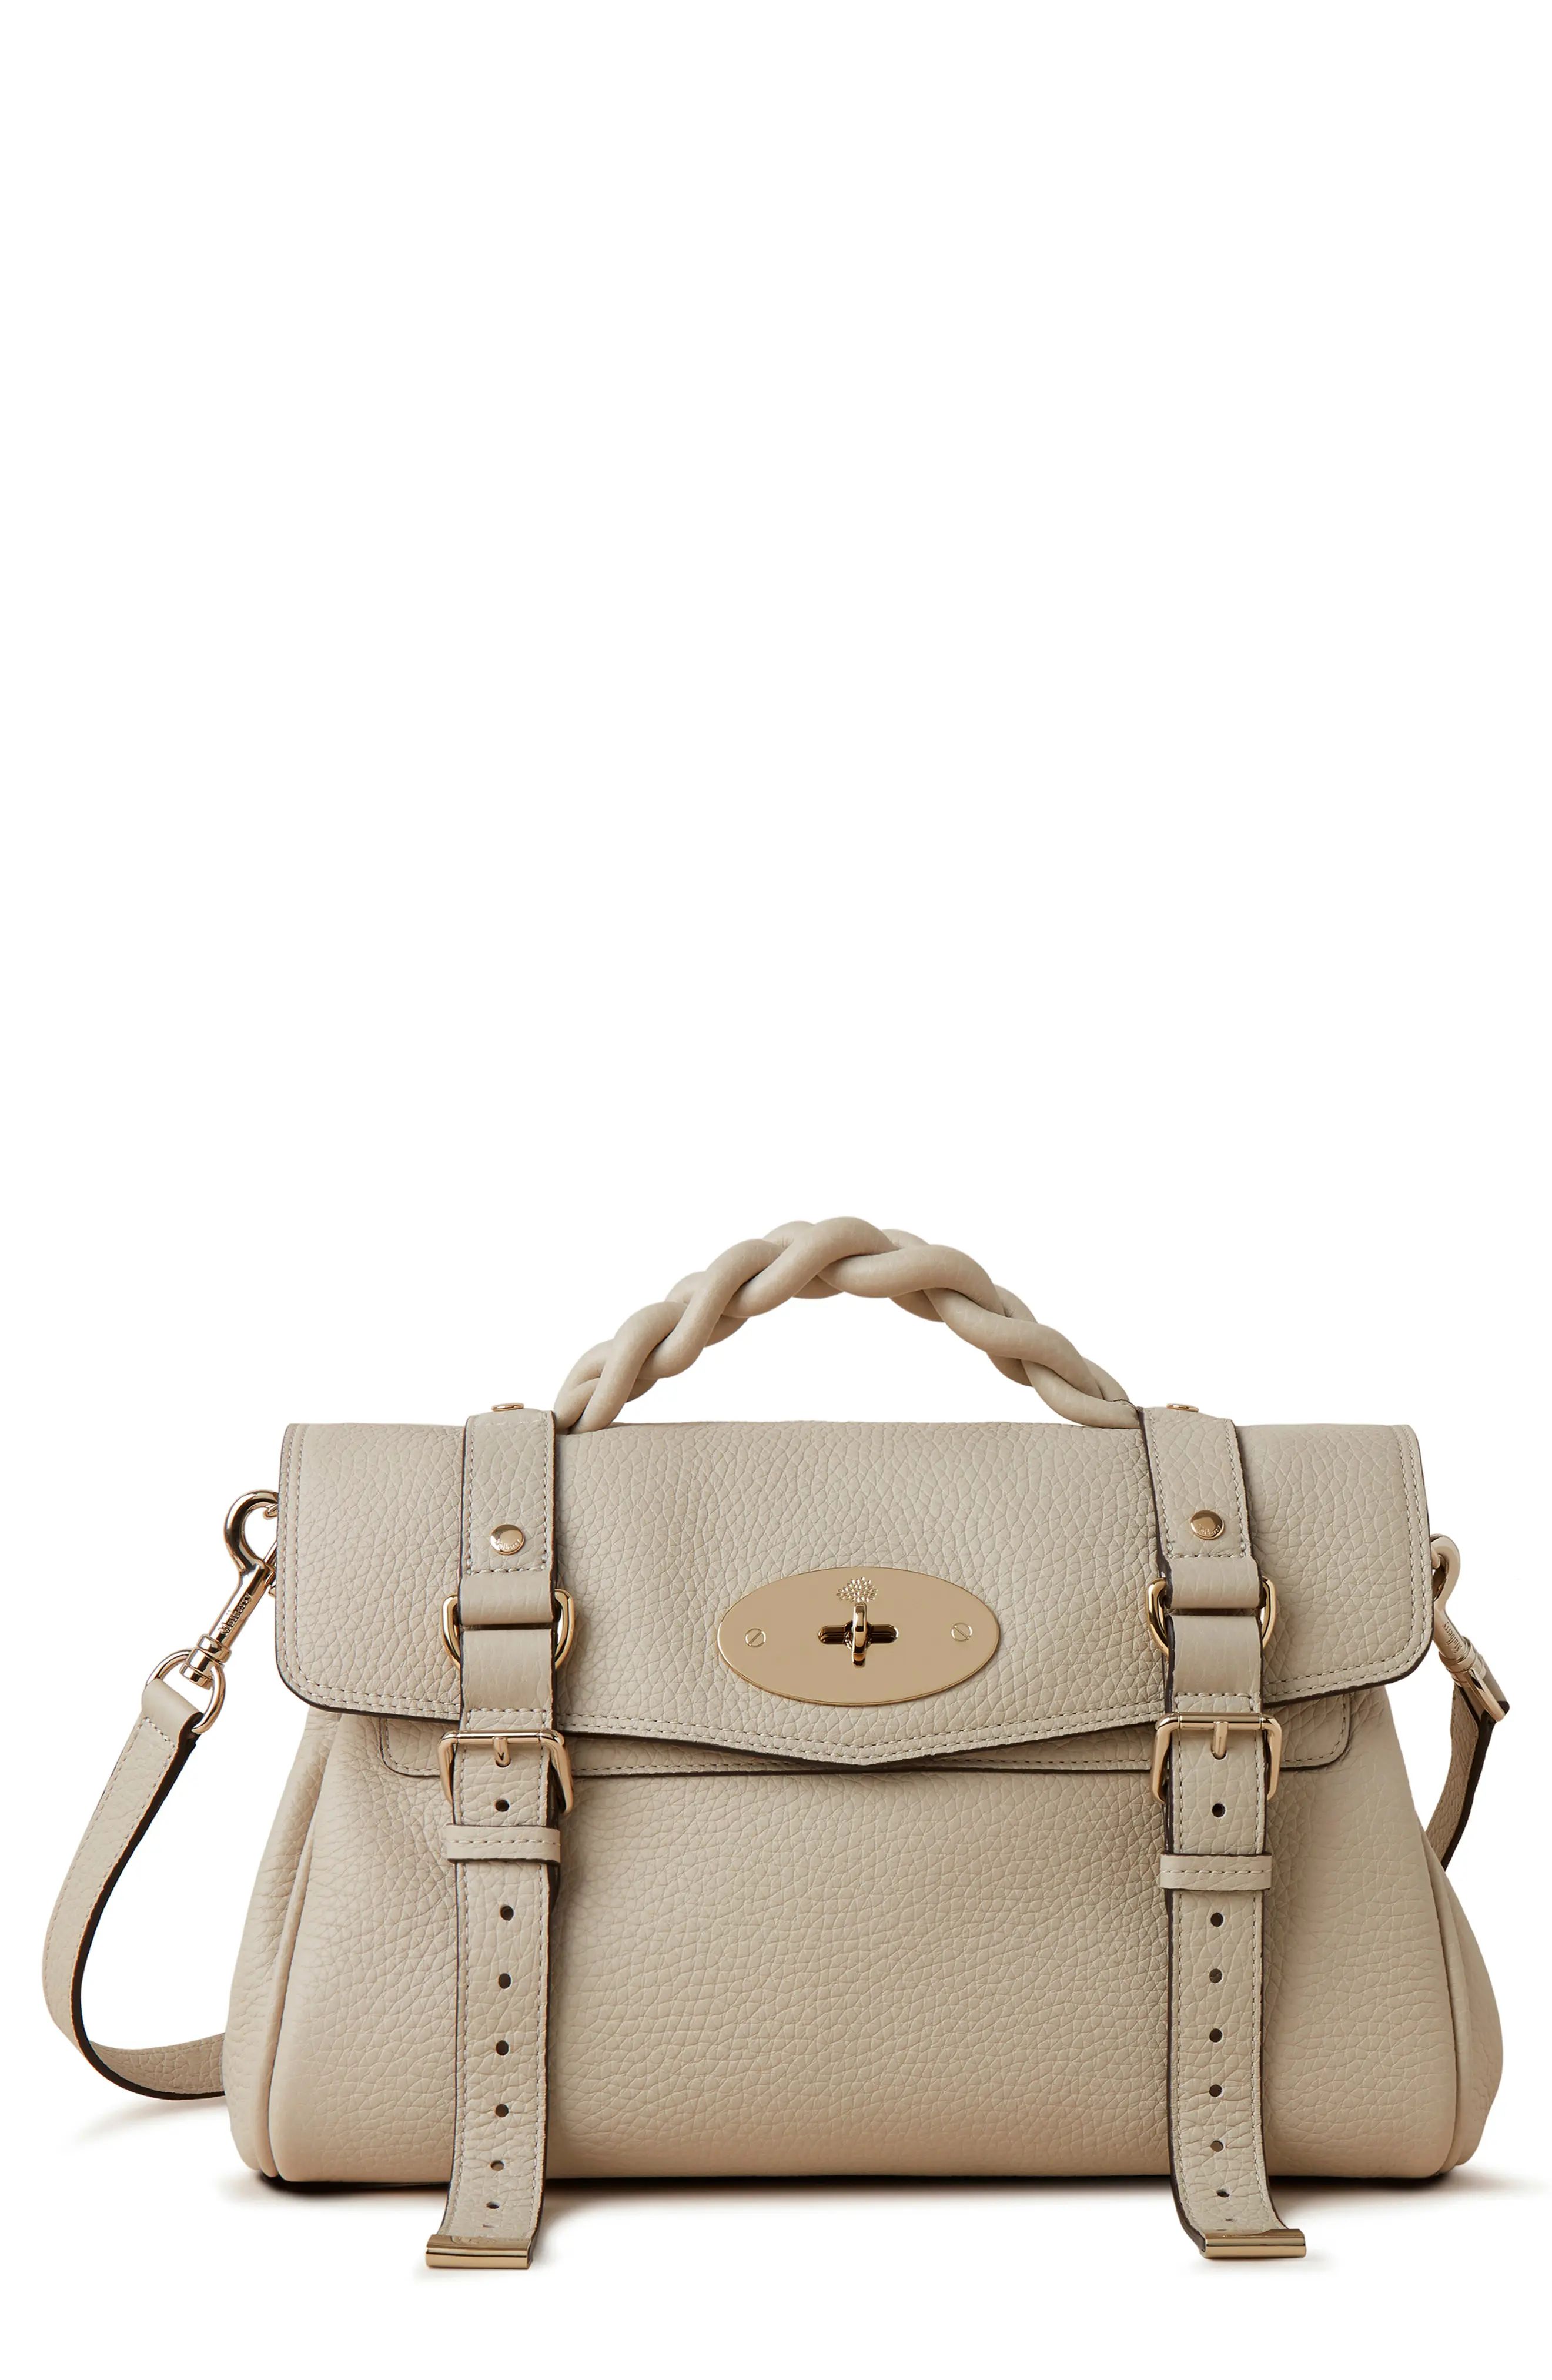 Mulberry Alexa Leather Satchel in Chalk at Nordstrom | Nordstrom